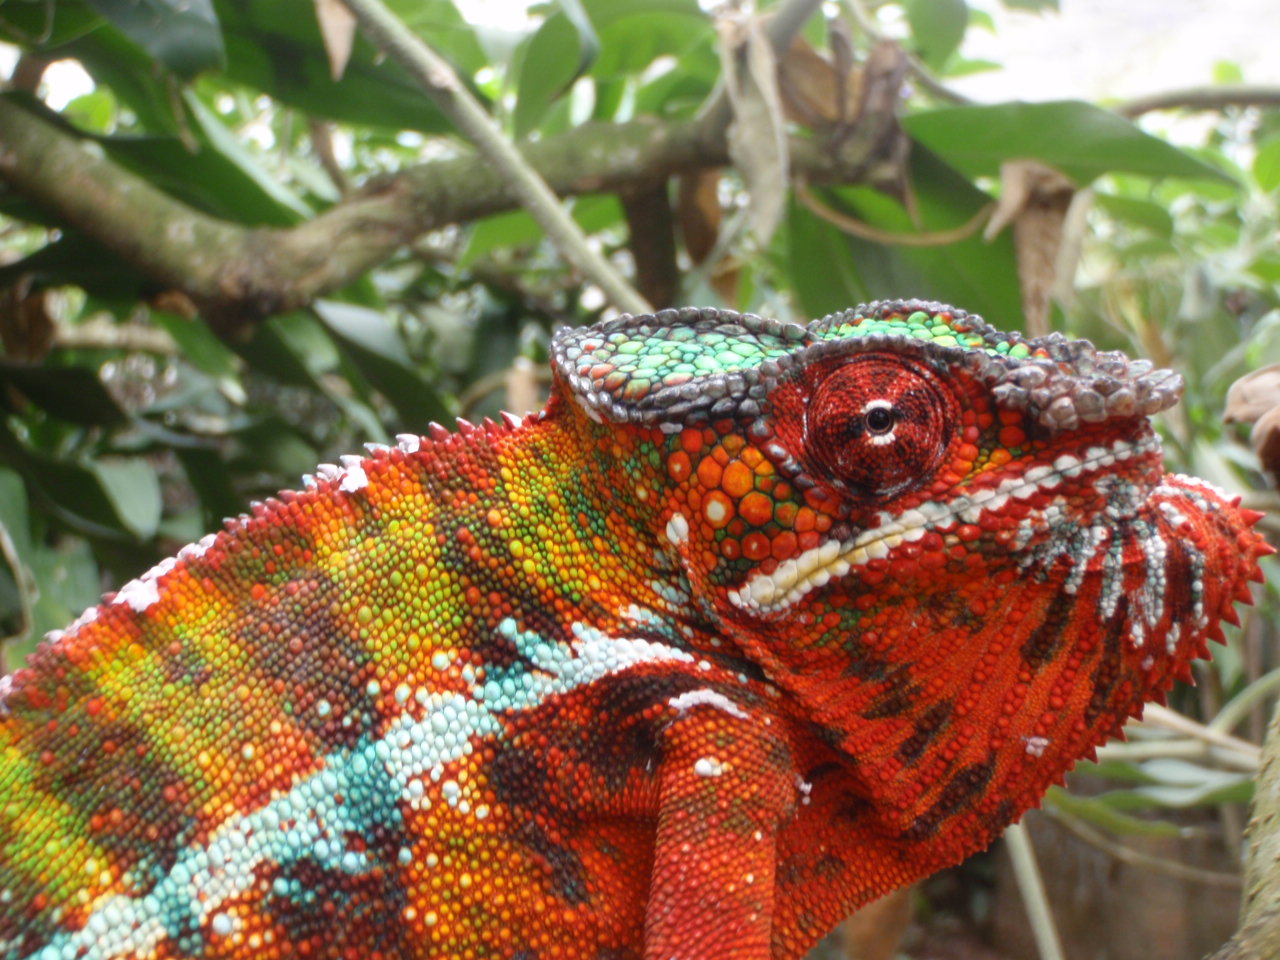 Red phase panther chameleon 